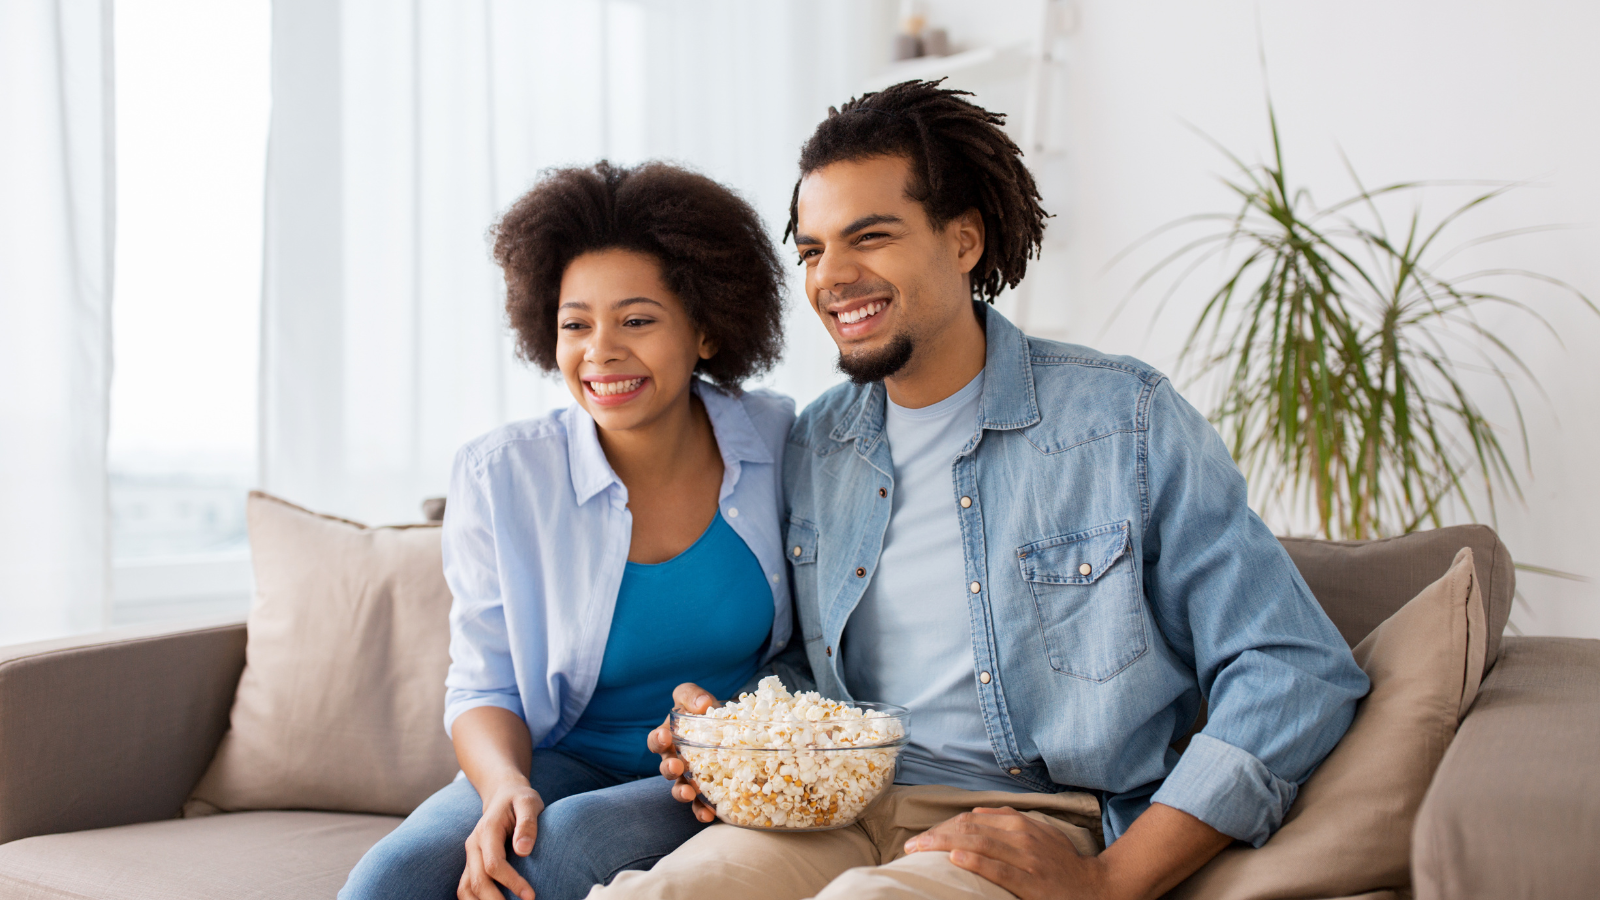 Man and woman sitting on couch with popcorn